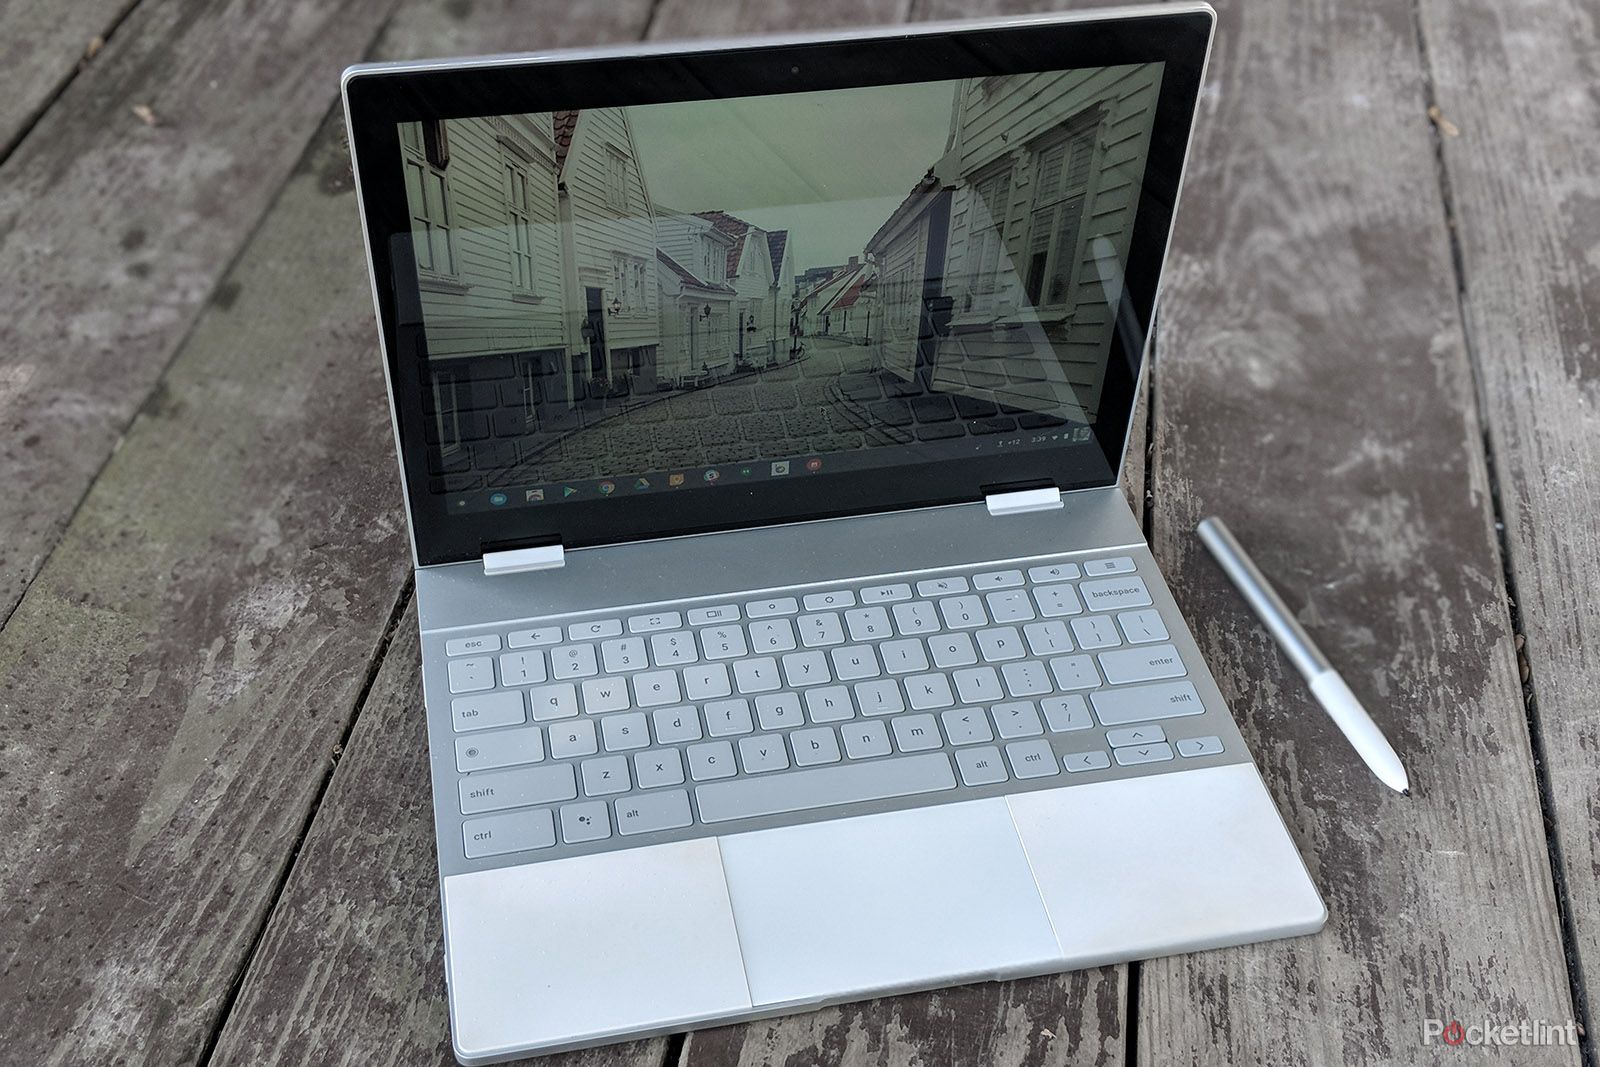 Google Pixelbook 2 Coming Soon Evidence Suggests Yes image 1